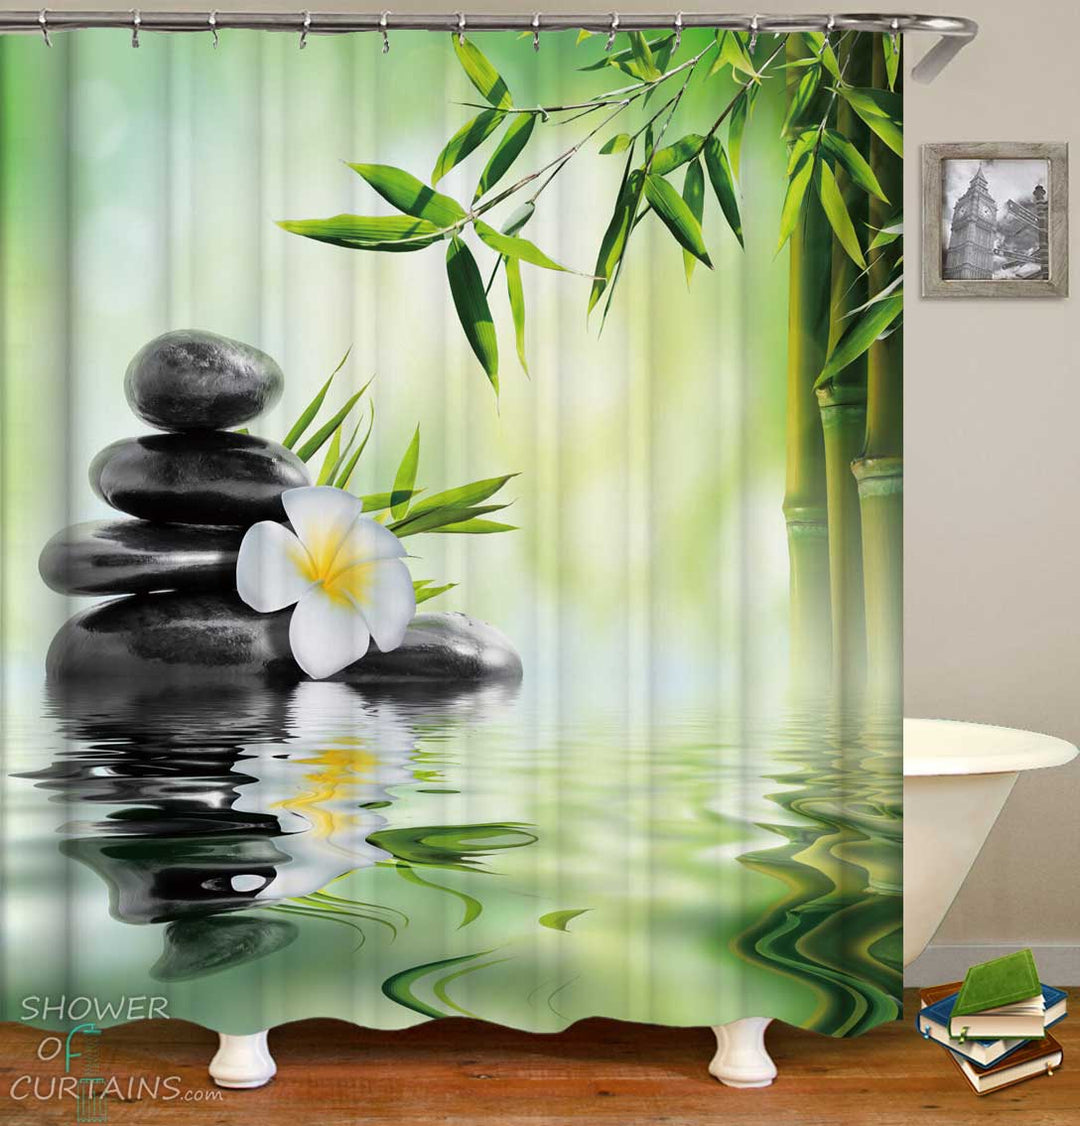 Shower Curtains with Spa Plumeria Pebbles and Bamboo